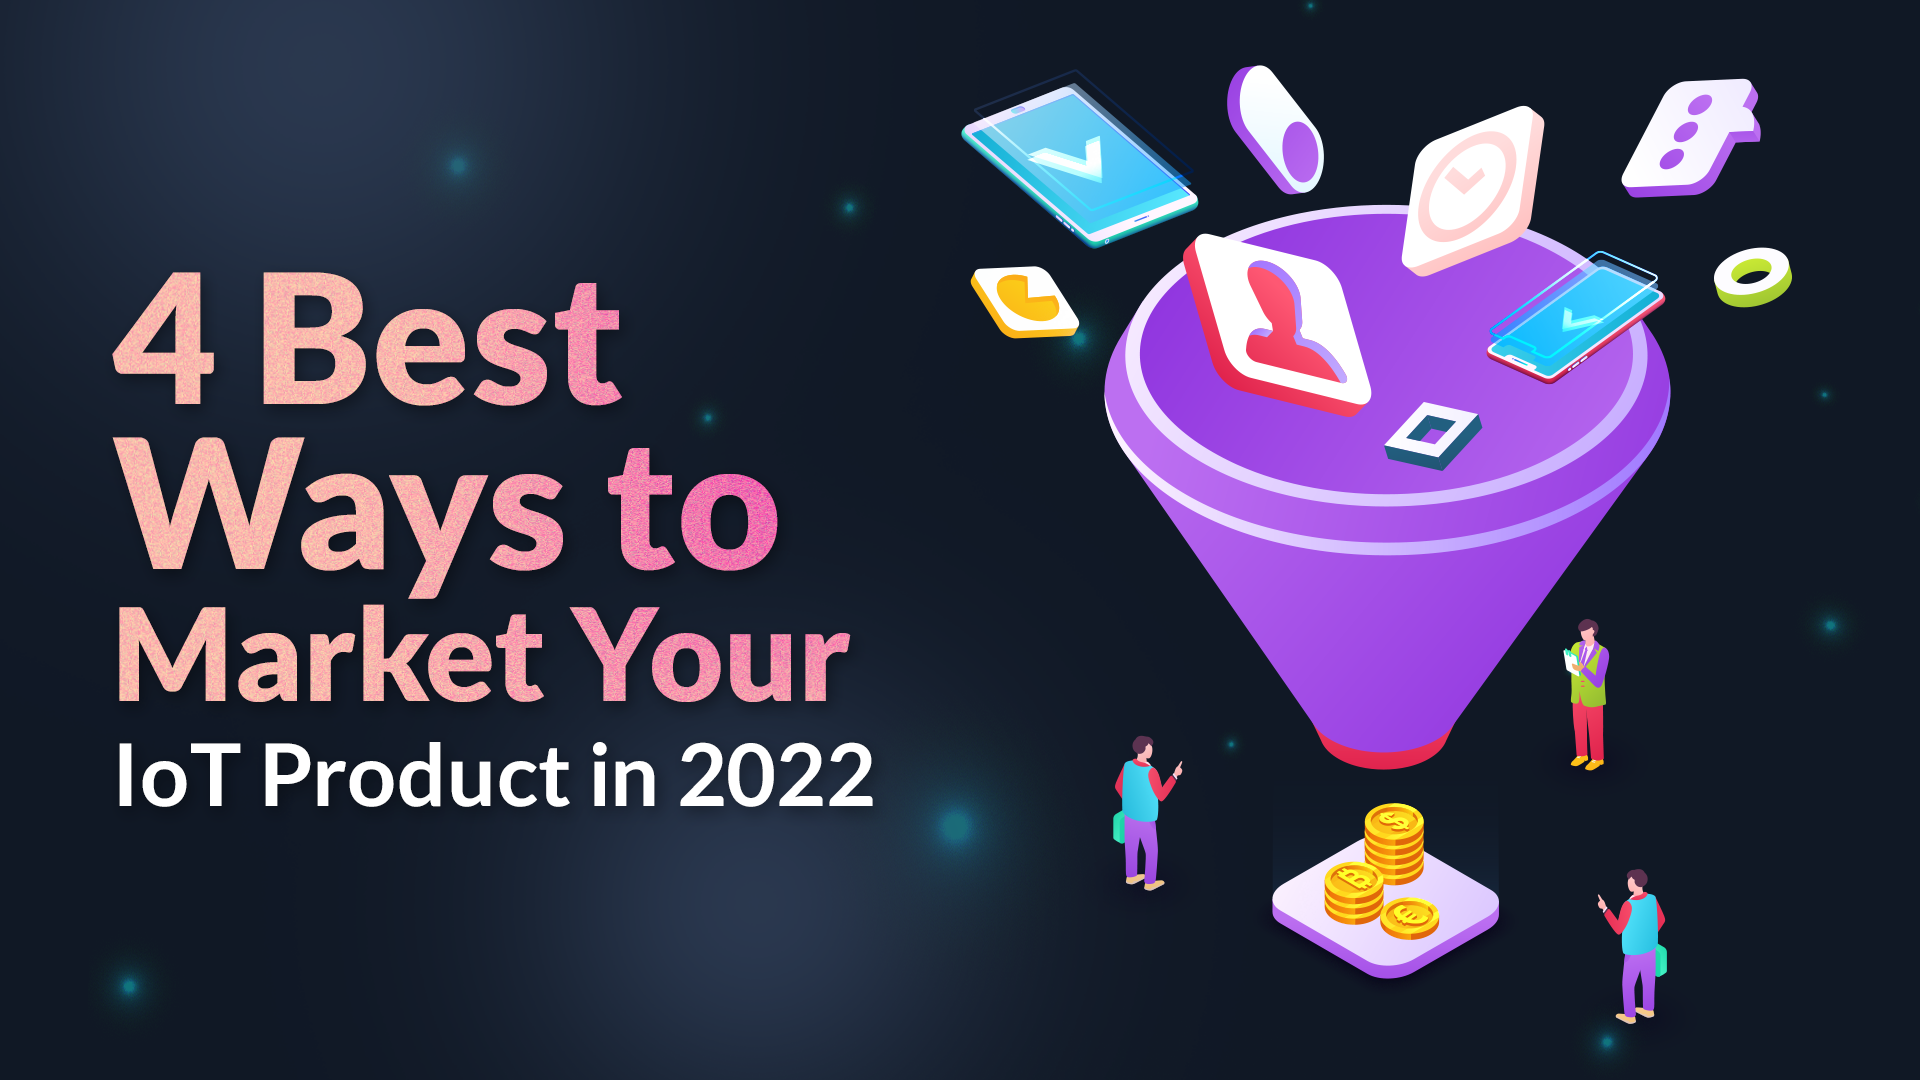 4 Best Ways to Market Your IoT Product in 2022